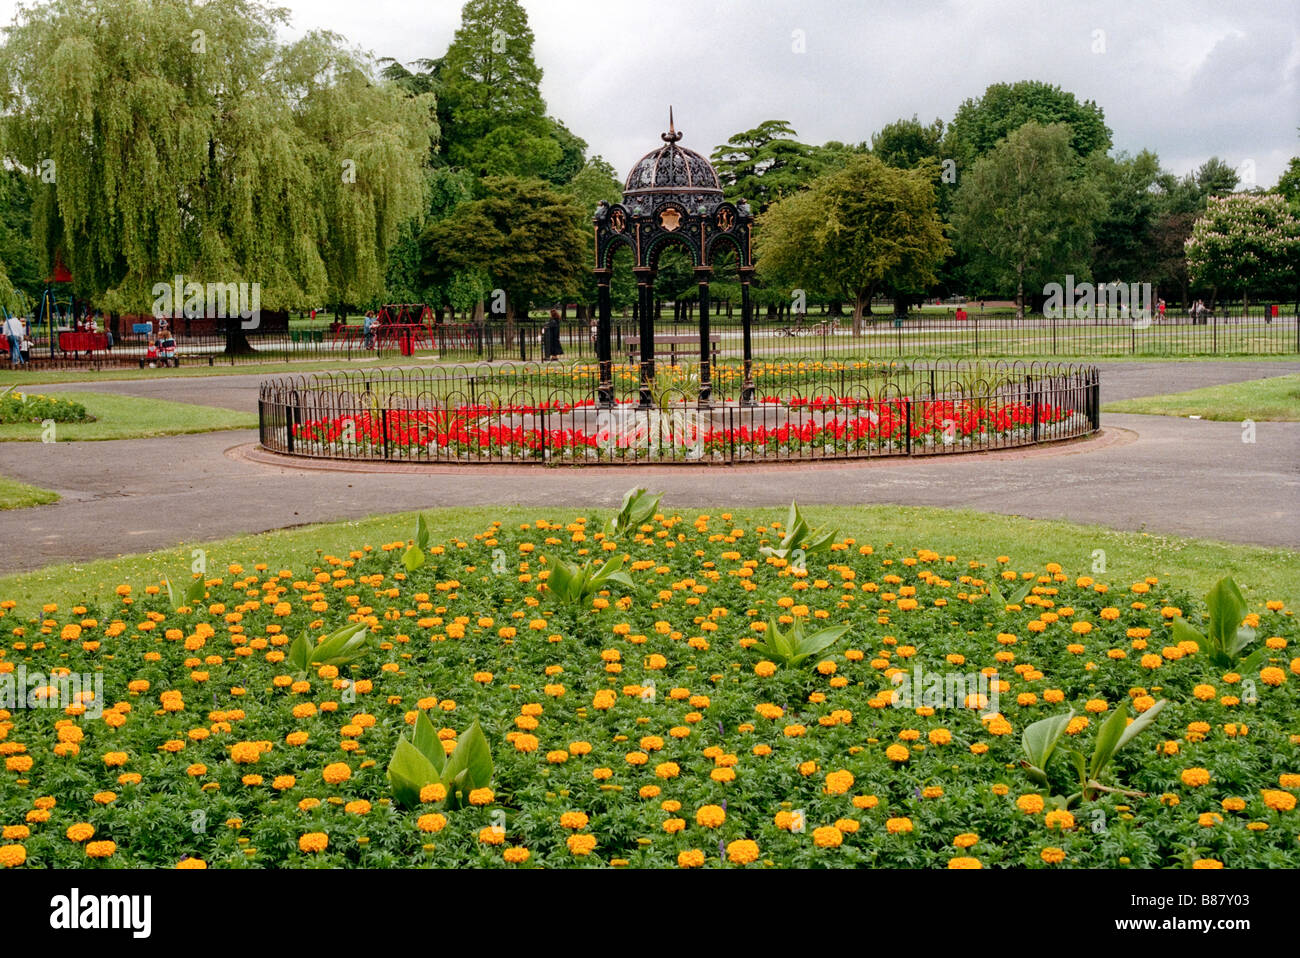 Memorial drinking fountain in Victoria Park an urban public park opened in 1897 covering 20 acres Cardiff South Wales UK Stock Photo